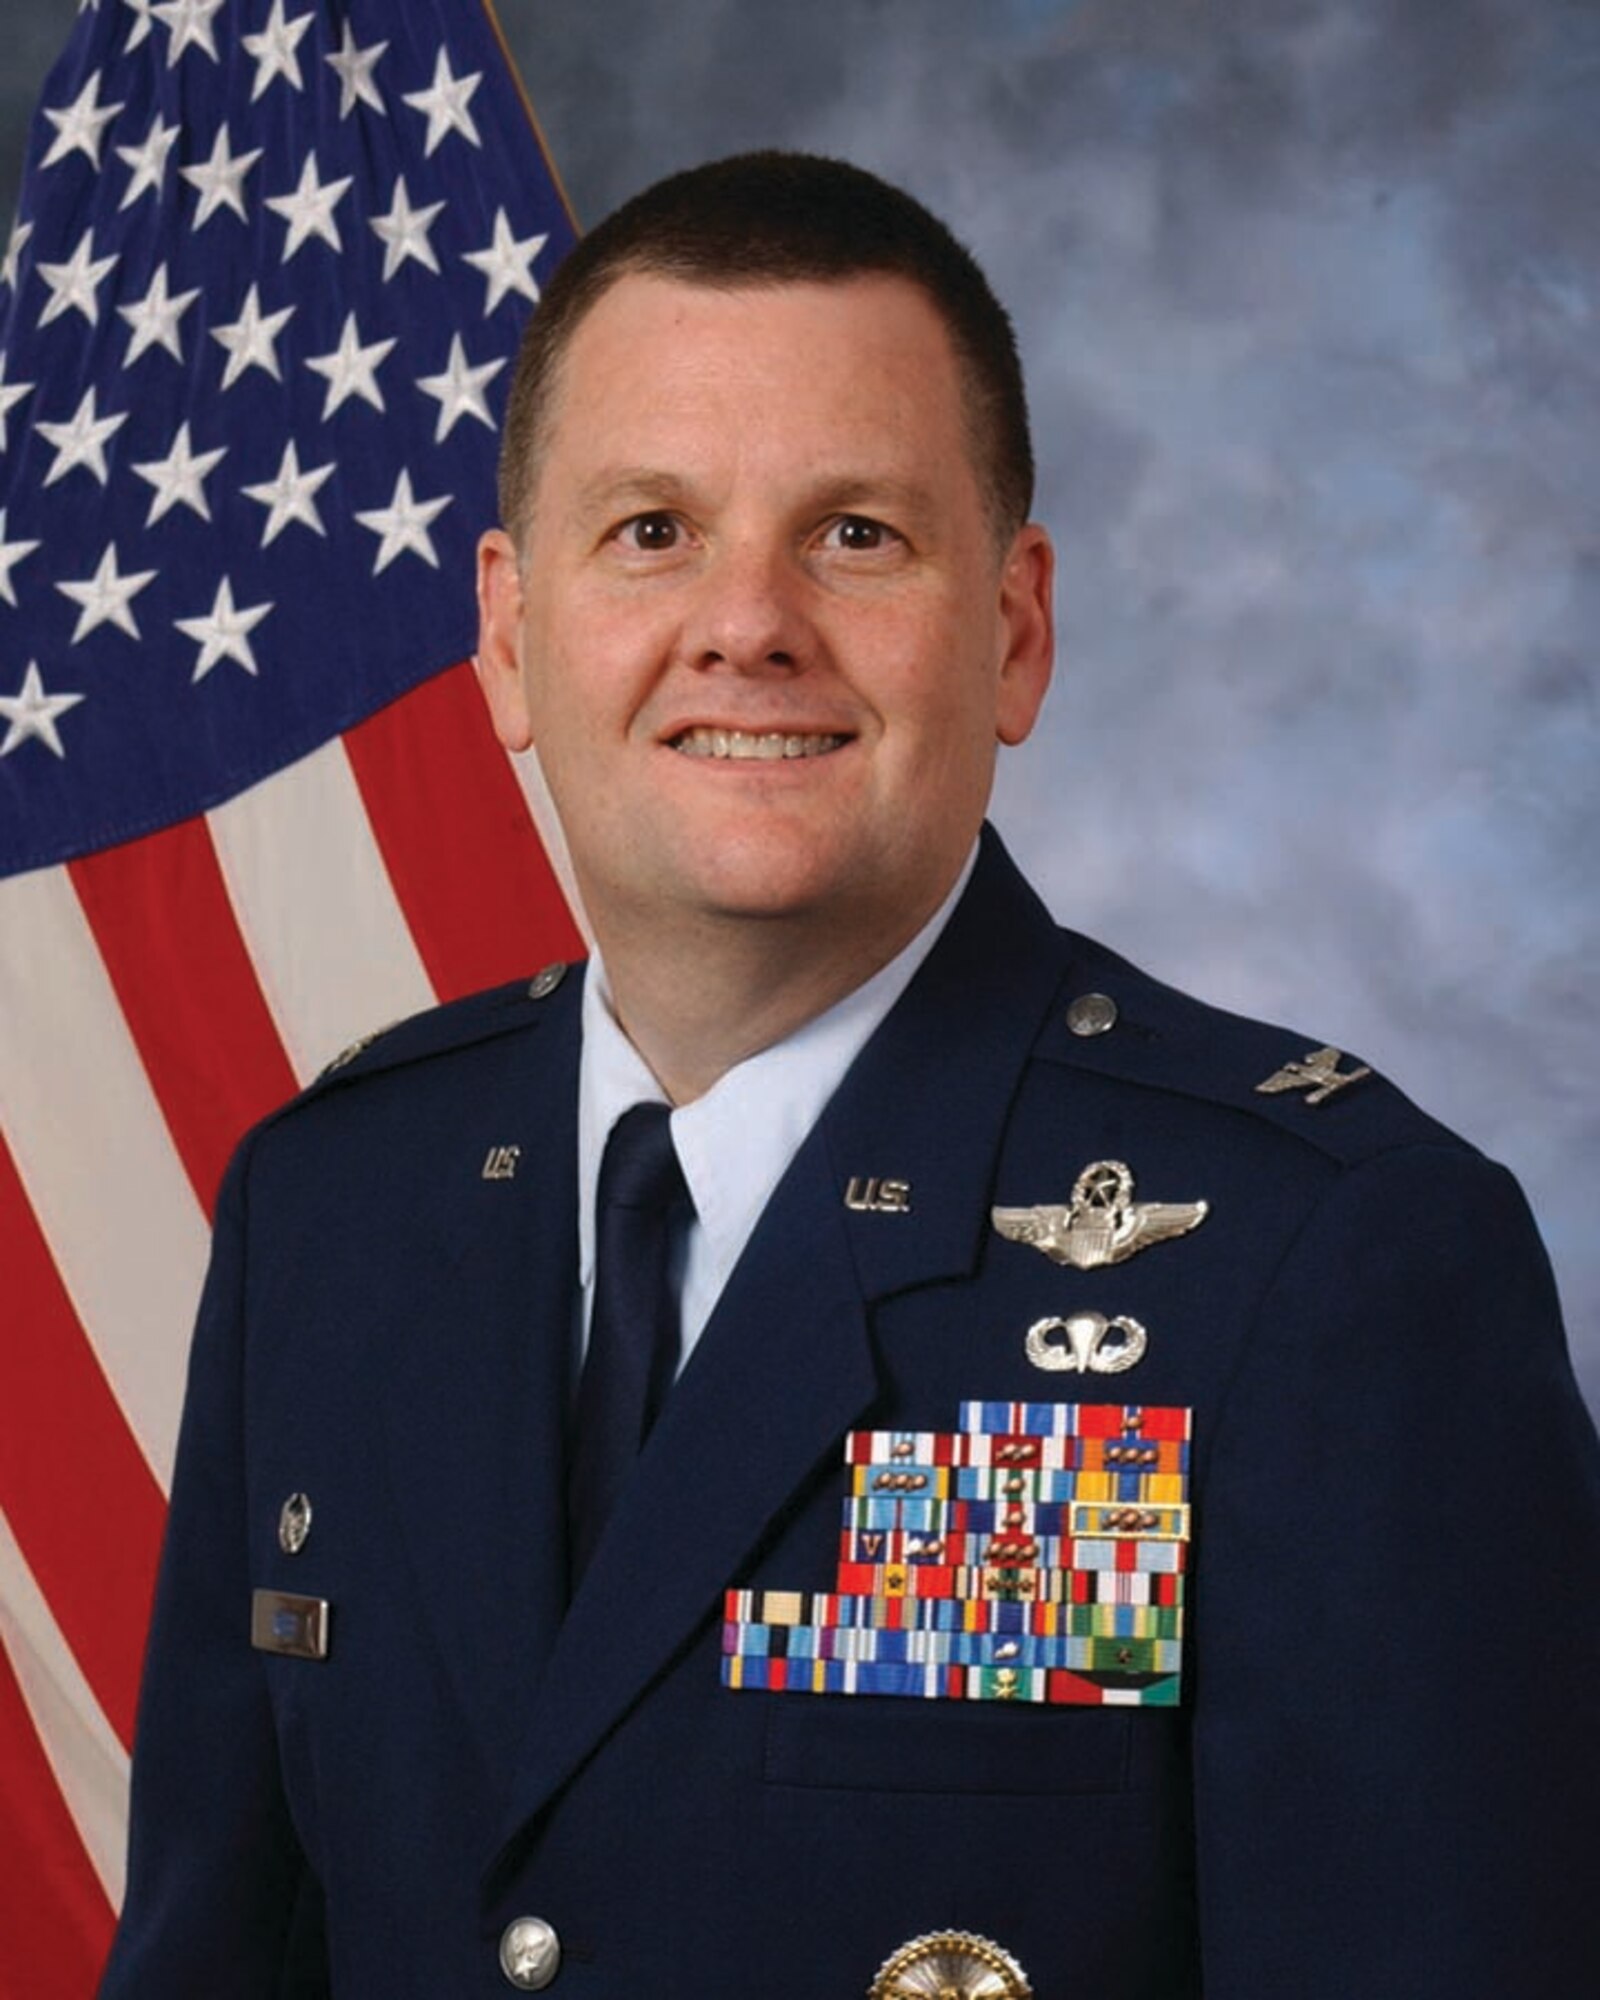 Col. Brad Webb will assume command of the 1st Special Operations Wing from Col. Norm Brozenick Jr., Tuesday. (Courtesy photo)